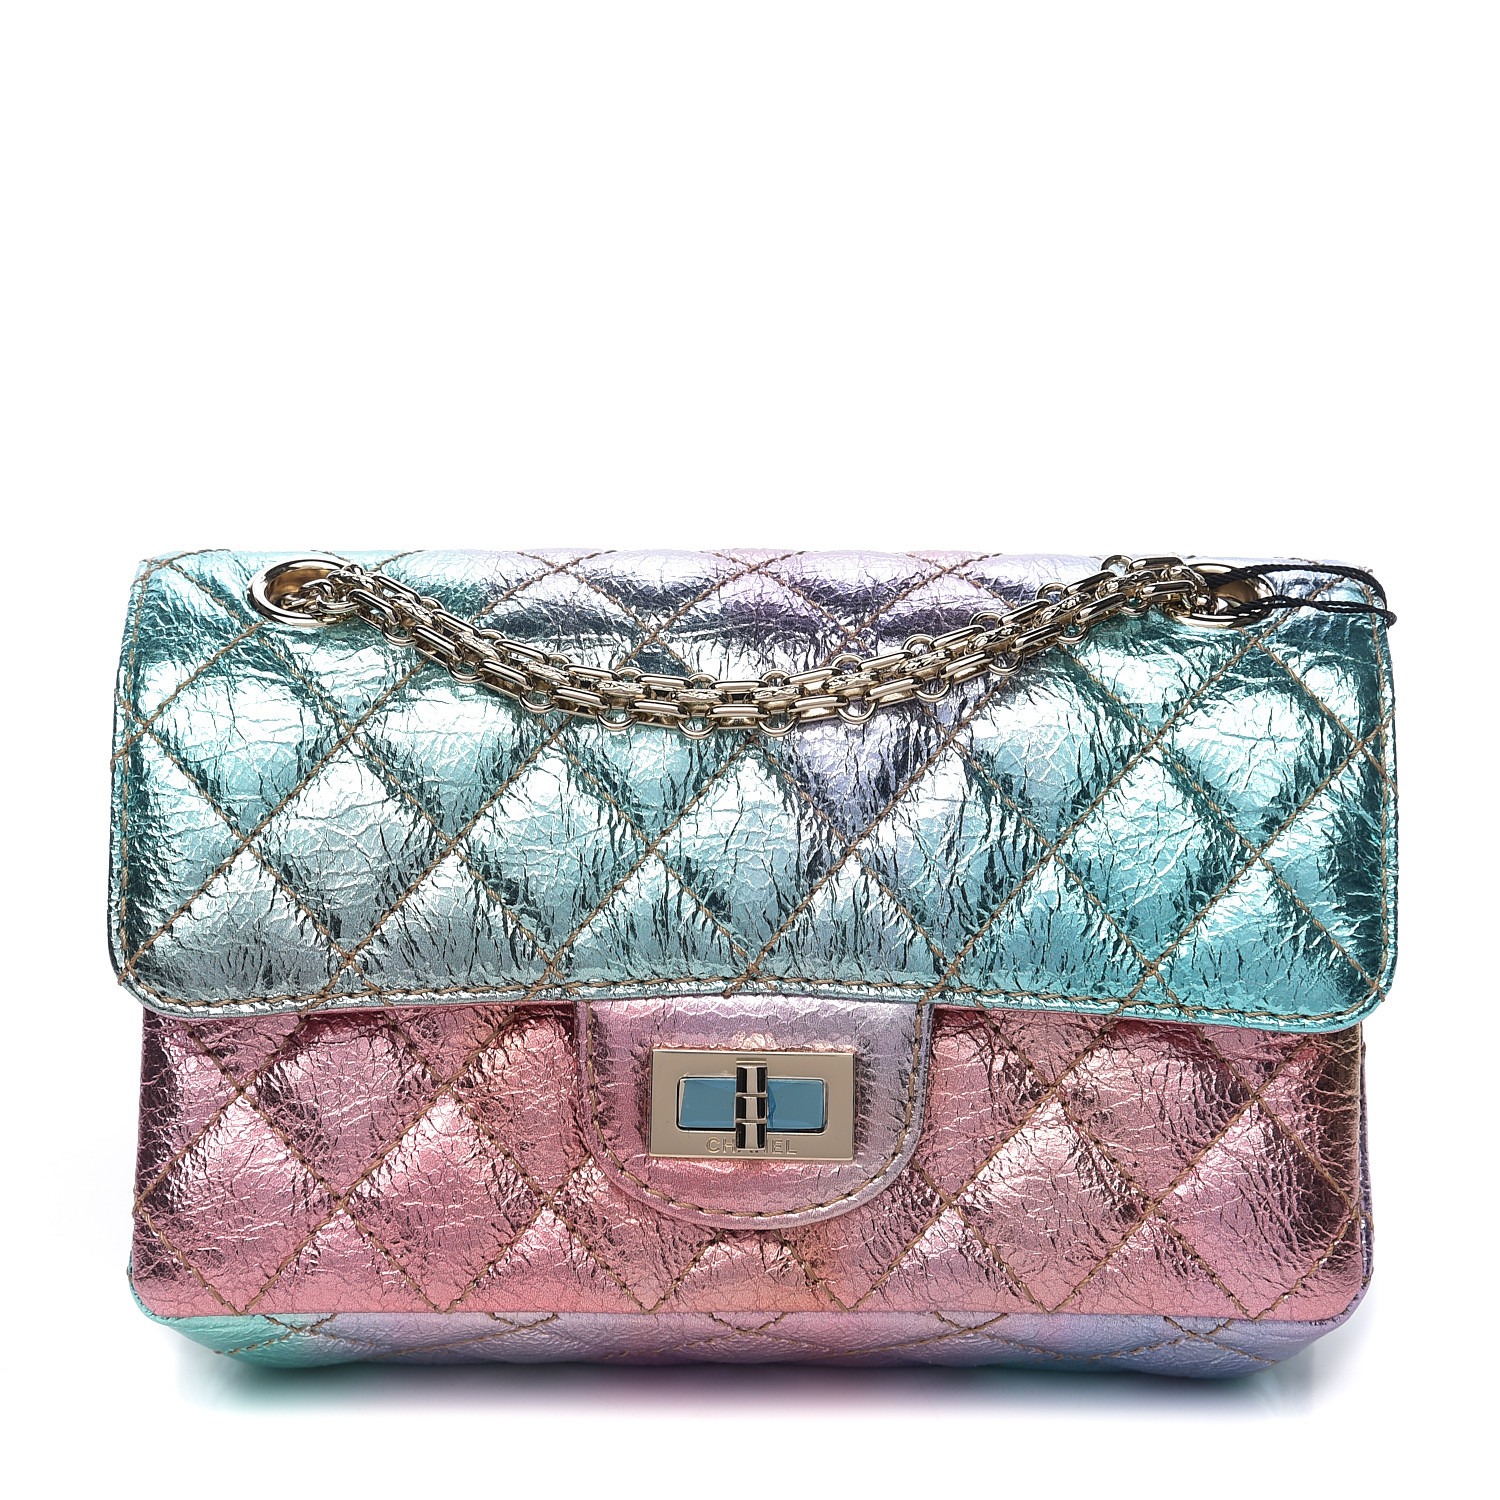 CHANEL Metallic Goatskin Quilted Mini 2.55 Reissue Flap Multicolor 563045